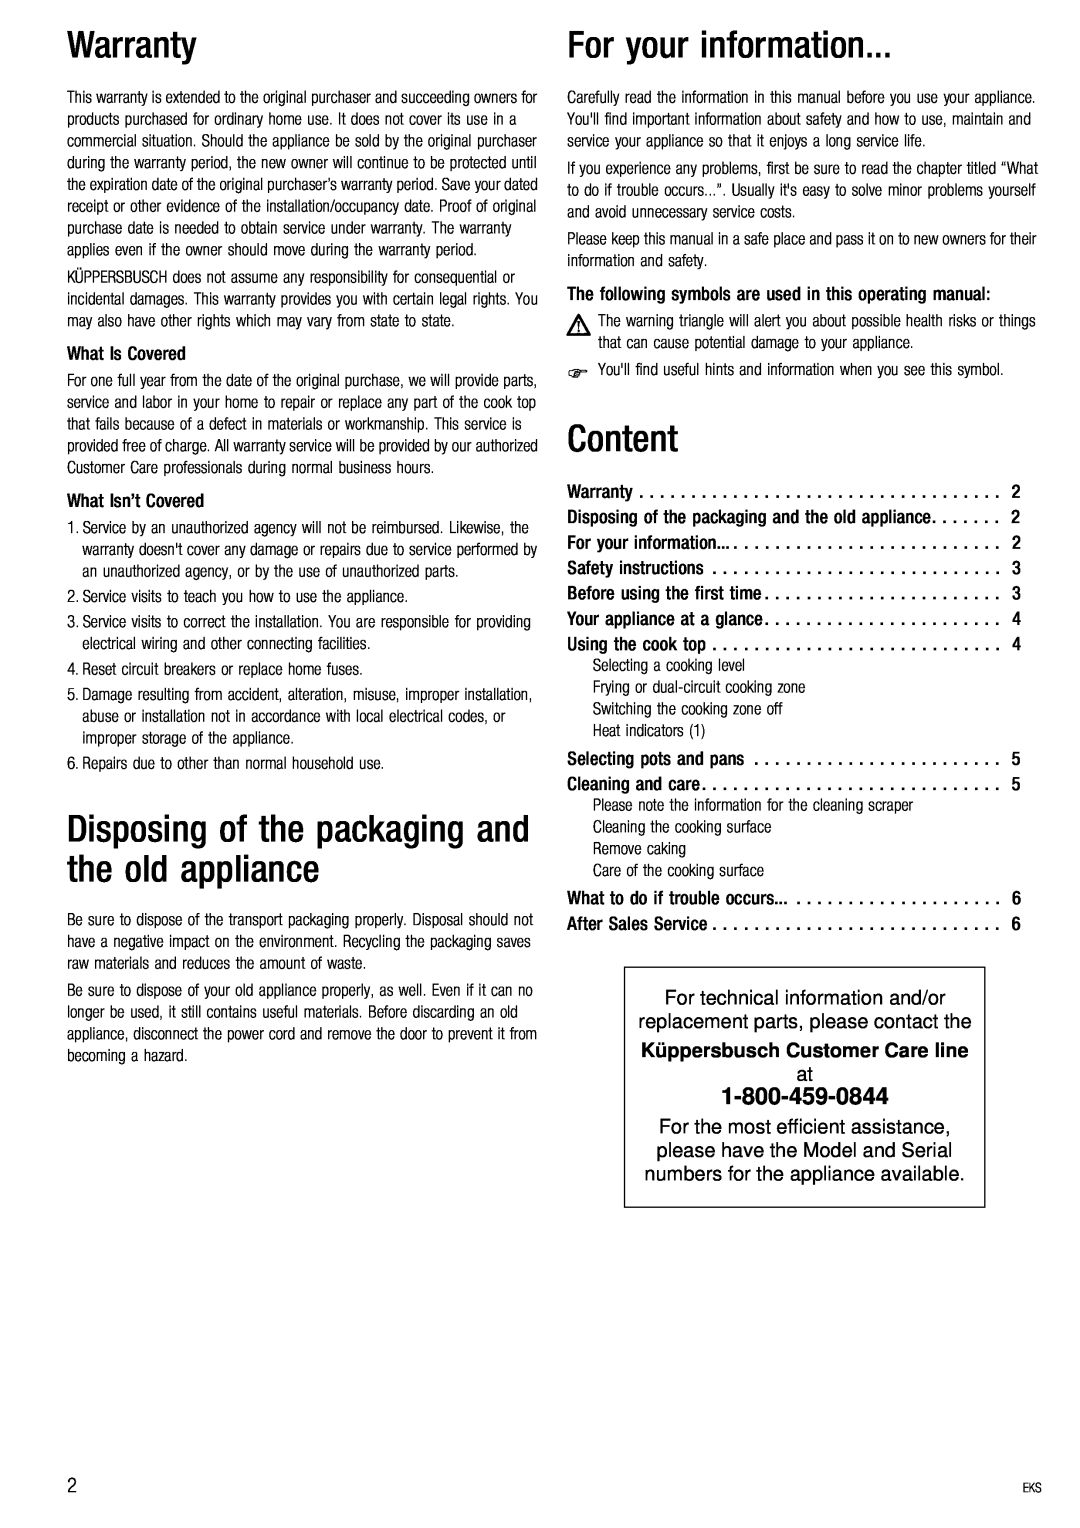 Kuppersbusch USA EKS 804.2 manual Warranty, For your information, Content, Disposing of the packaging and the old appliance 